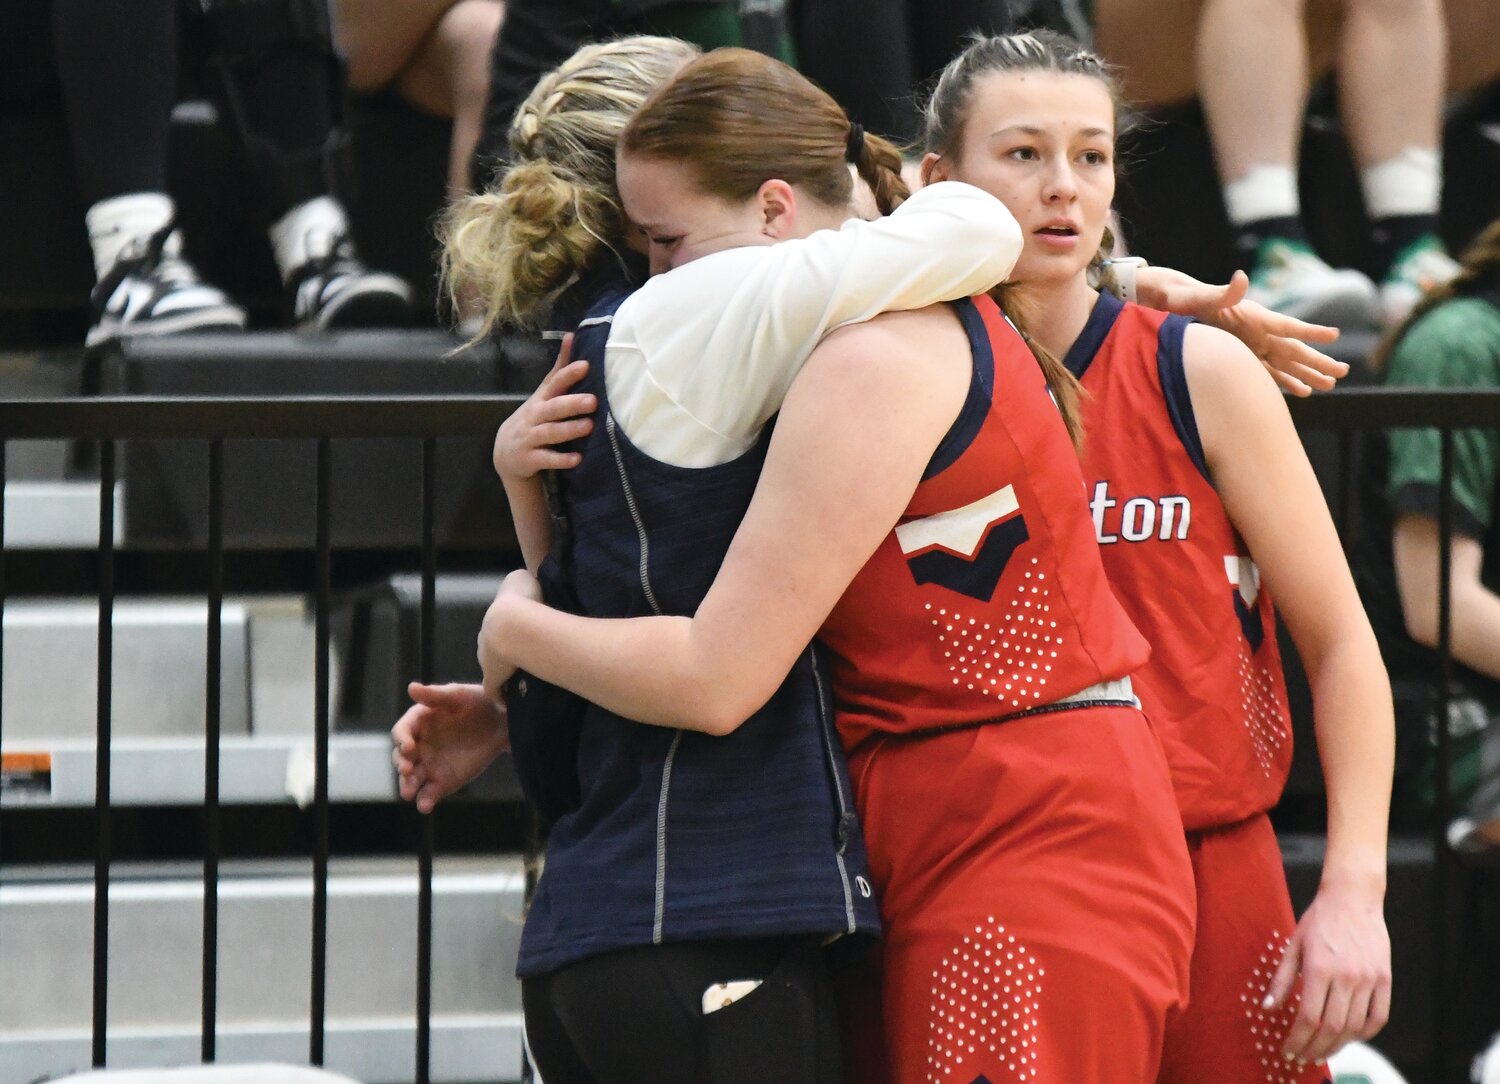 Lady Devils seniors Rhyen Debenham (left) and Jacey Bardsley are comforted by team trainer Jackie Clark, as time winds down during Evanston’s 49-29 loss to Riverton Friday in Green River. It was the final high school game for both players.